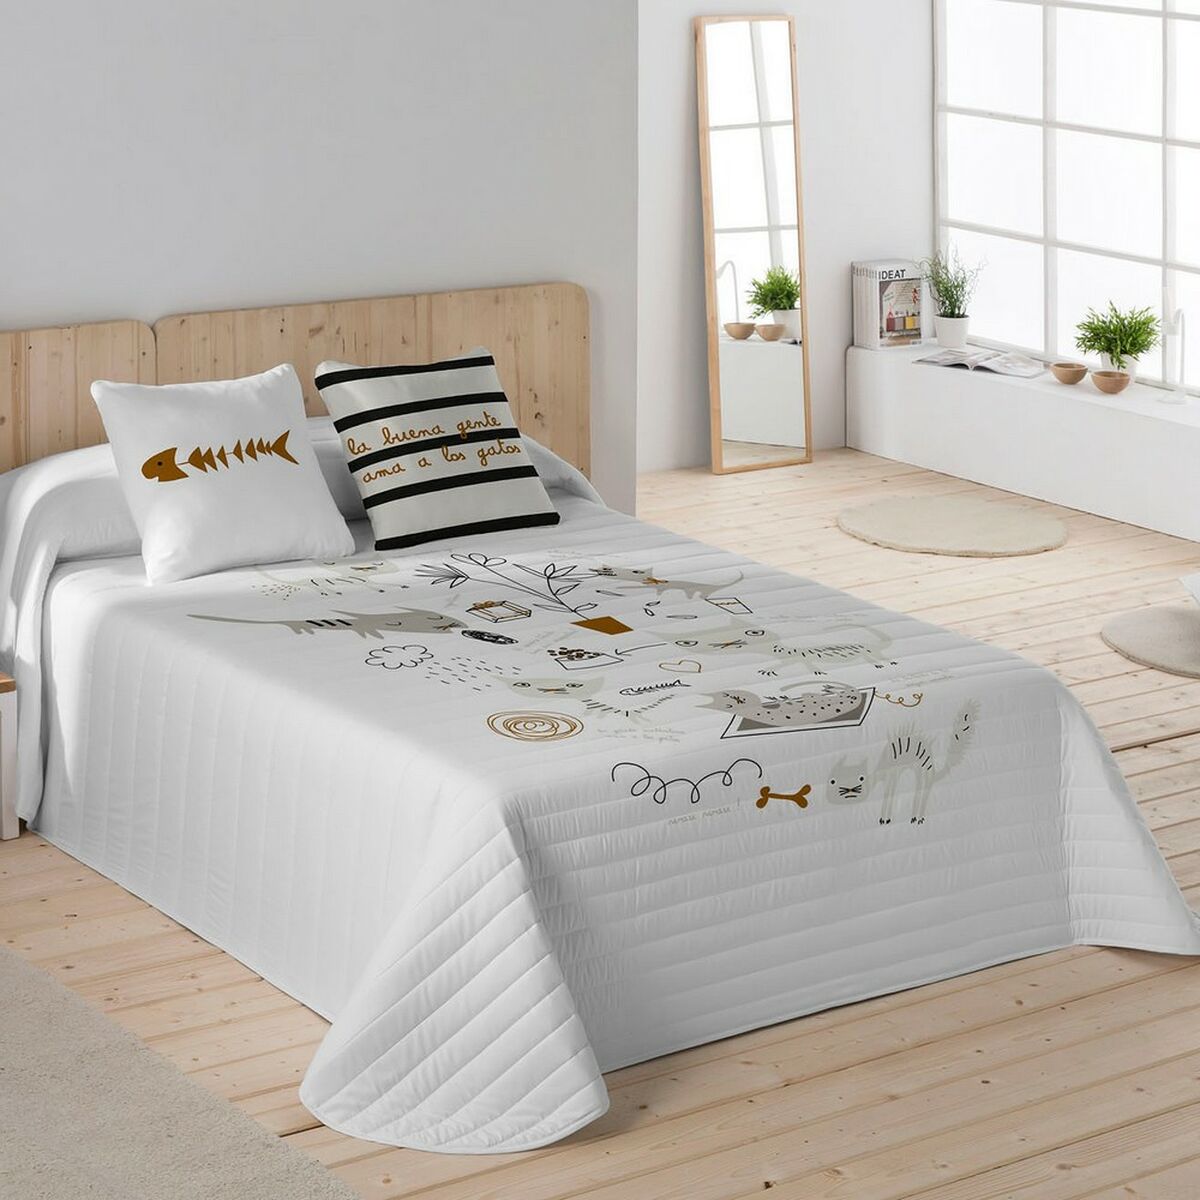 Bedspread (quilt) Panzup Cats 1 (250 x 260 cm) (Bed 150/160)